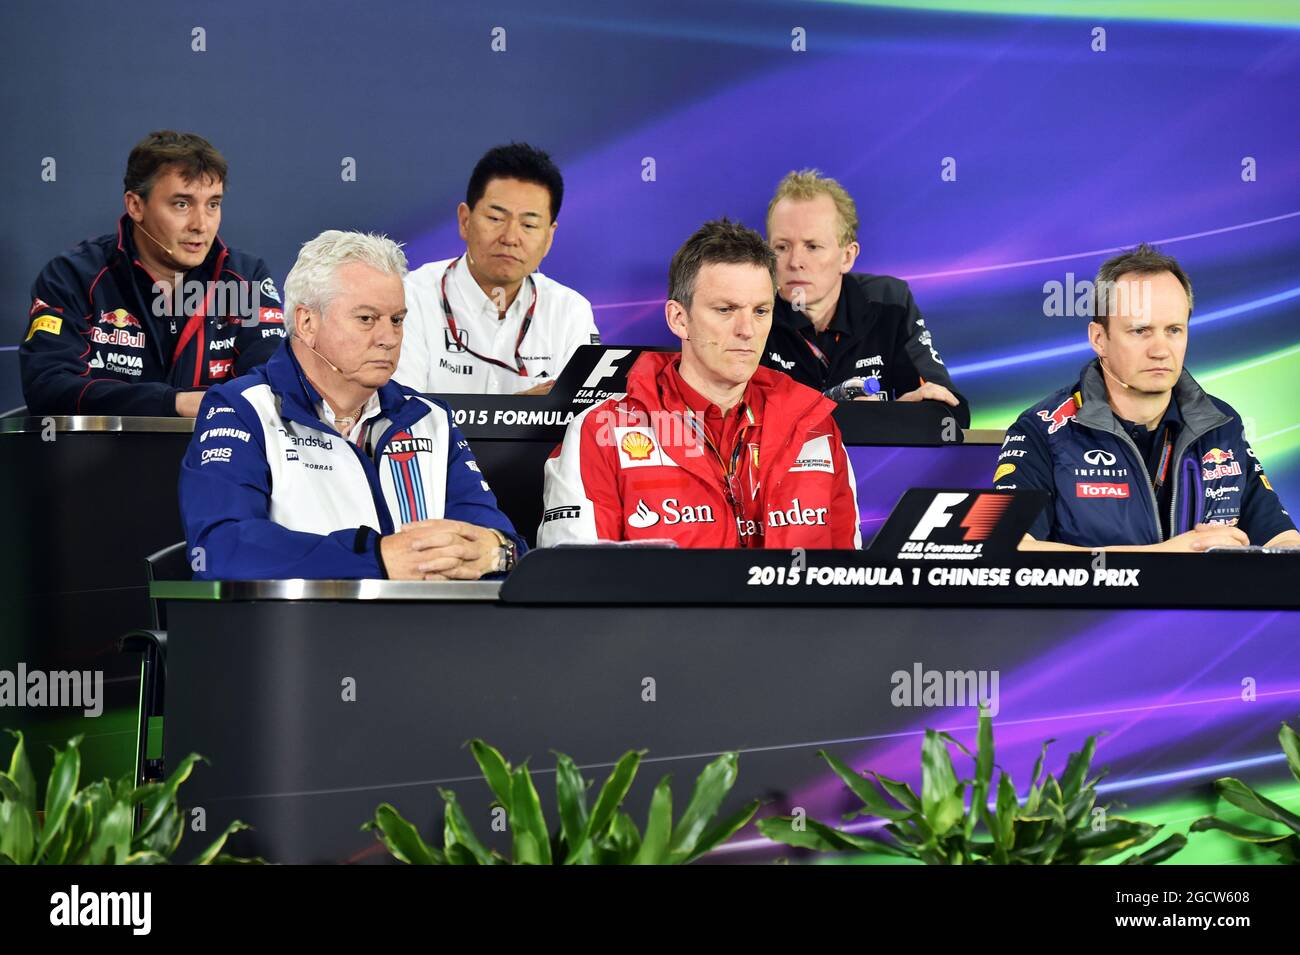 The FIA Press Conference (From back row (L to R)): James Key (GBR) Scuderia Toro Rosso Technical Director; Ayao Komatsu (JPN) Lotus F1 Team Race Engineer; Andrew Green (GBR) Sahara Force India F1 Team Technical Director; Pat Symonds (GBR) Williams Chief Technical Officer; James Allison (GBR) Ferrari Chassis Technical Director; Paul Monaghan (GBR) Red Bull Racing Chief Engineer. Chinese Grand Prix, Friday 10th April 2015. Shanghai, China. Stock Photo